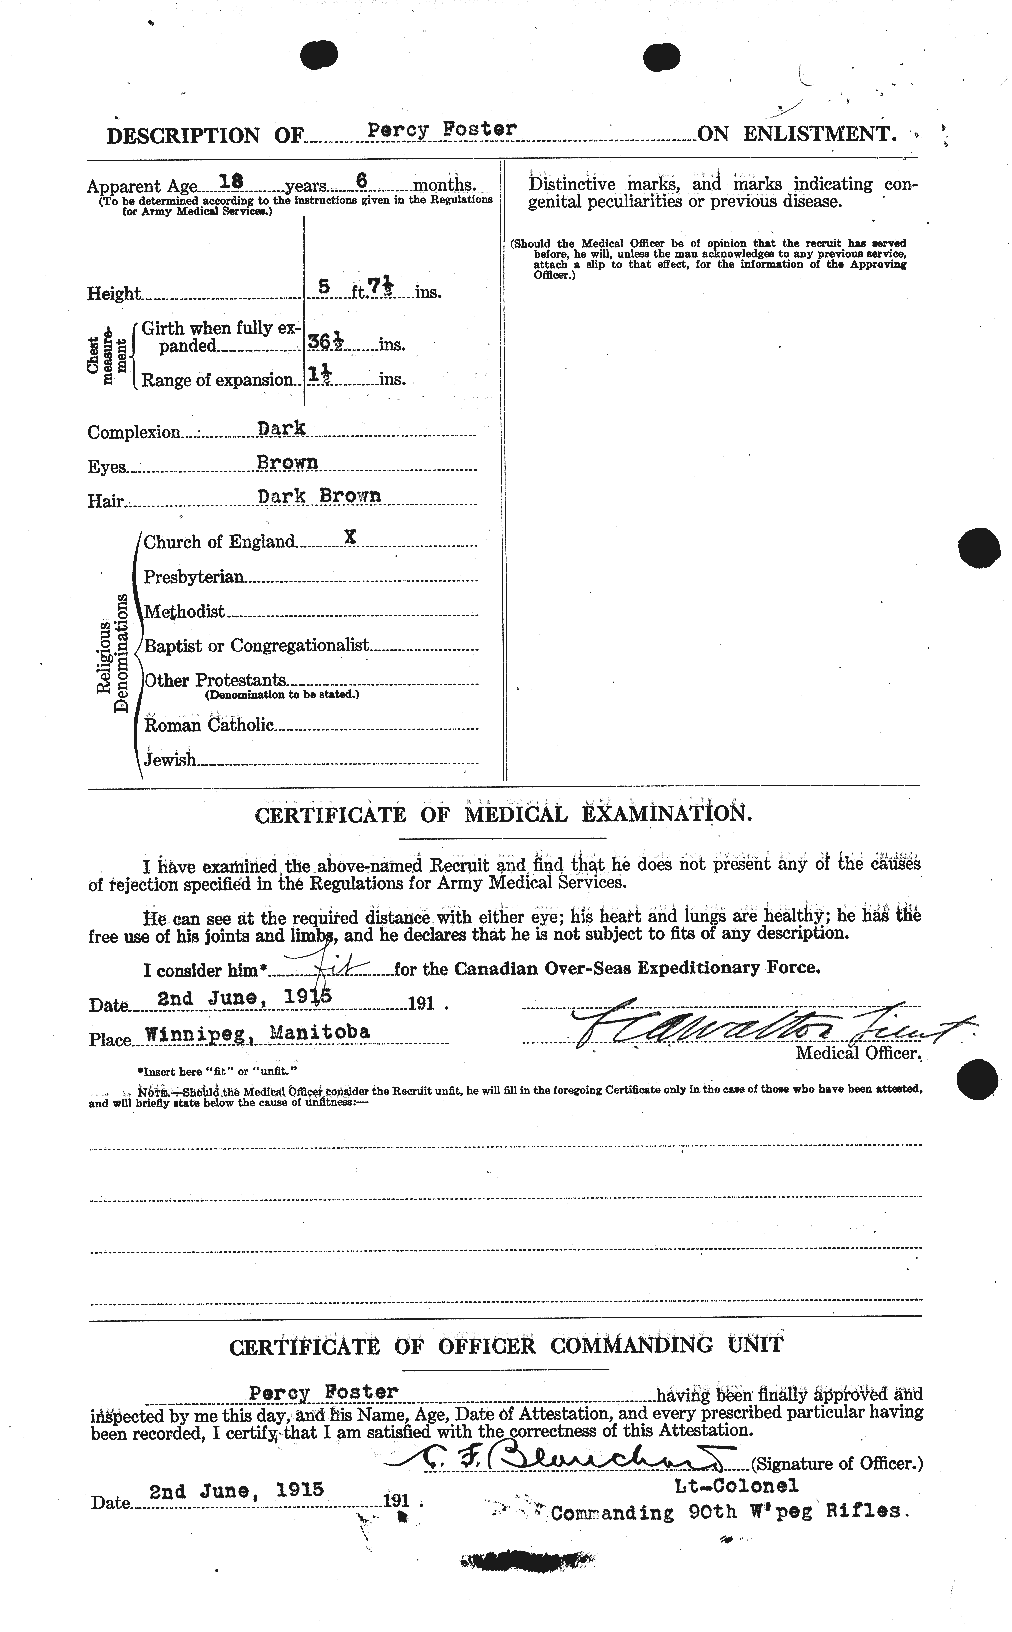 Personnel Records of the First World War - CEF 333441b